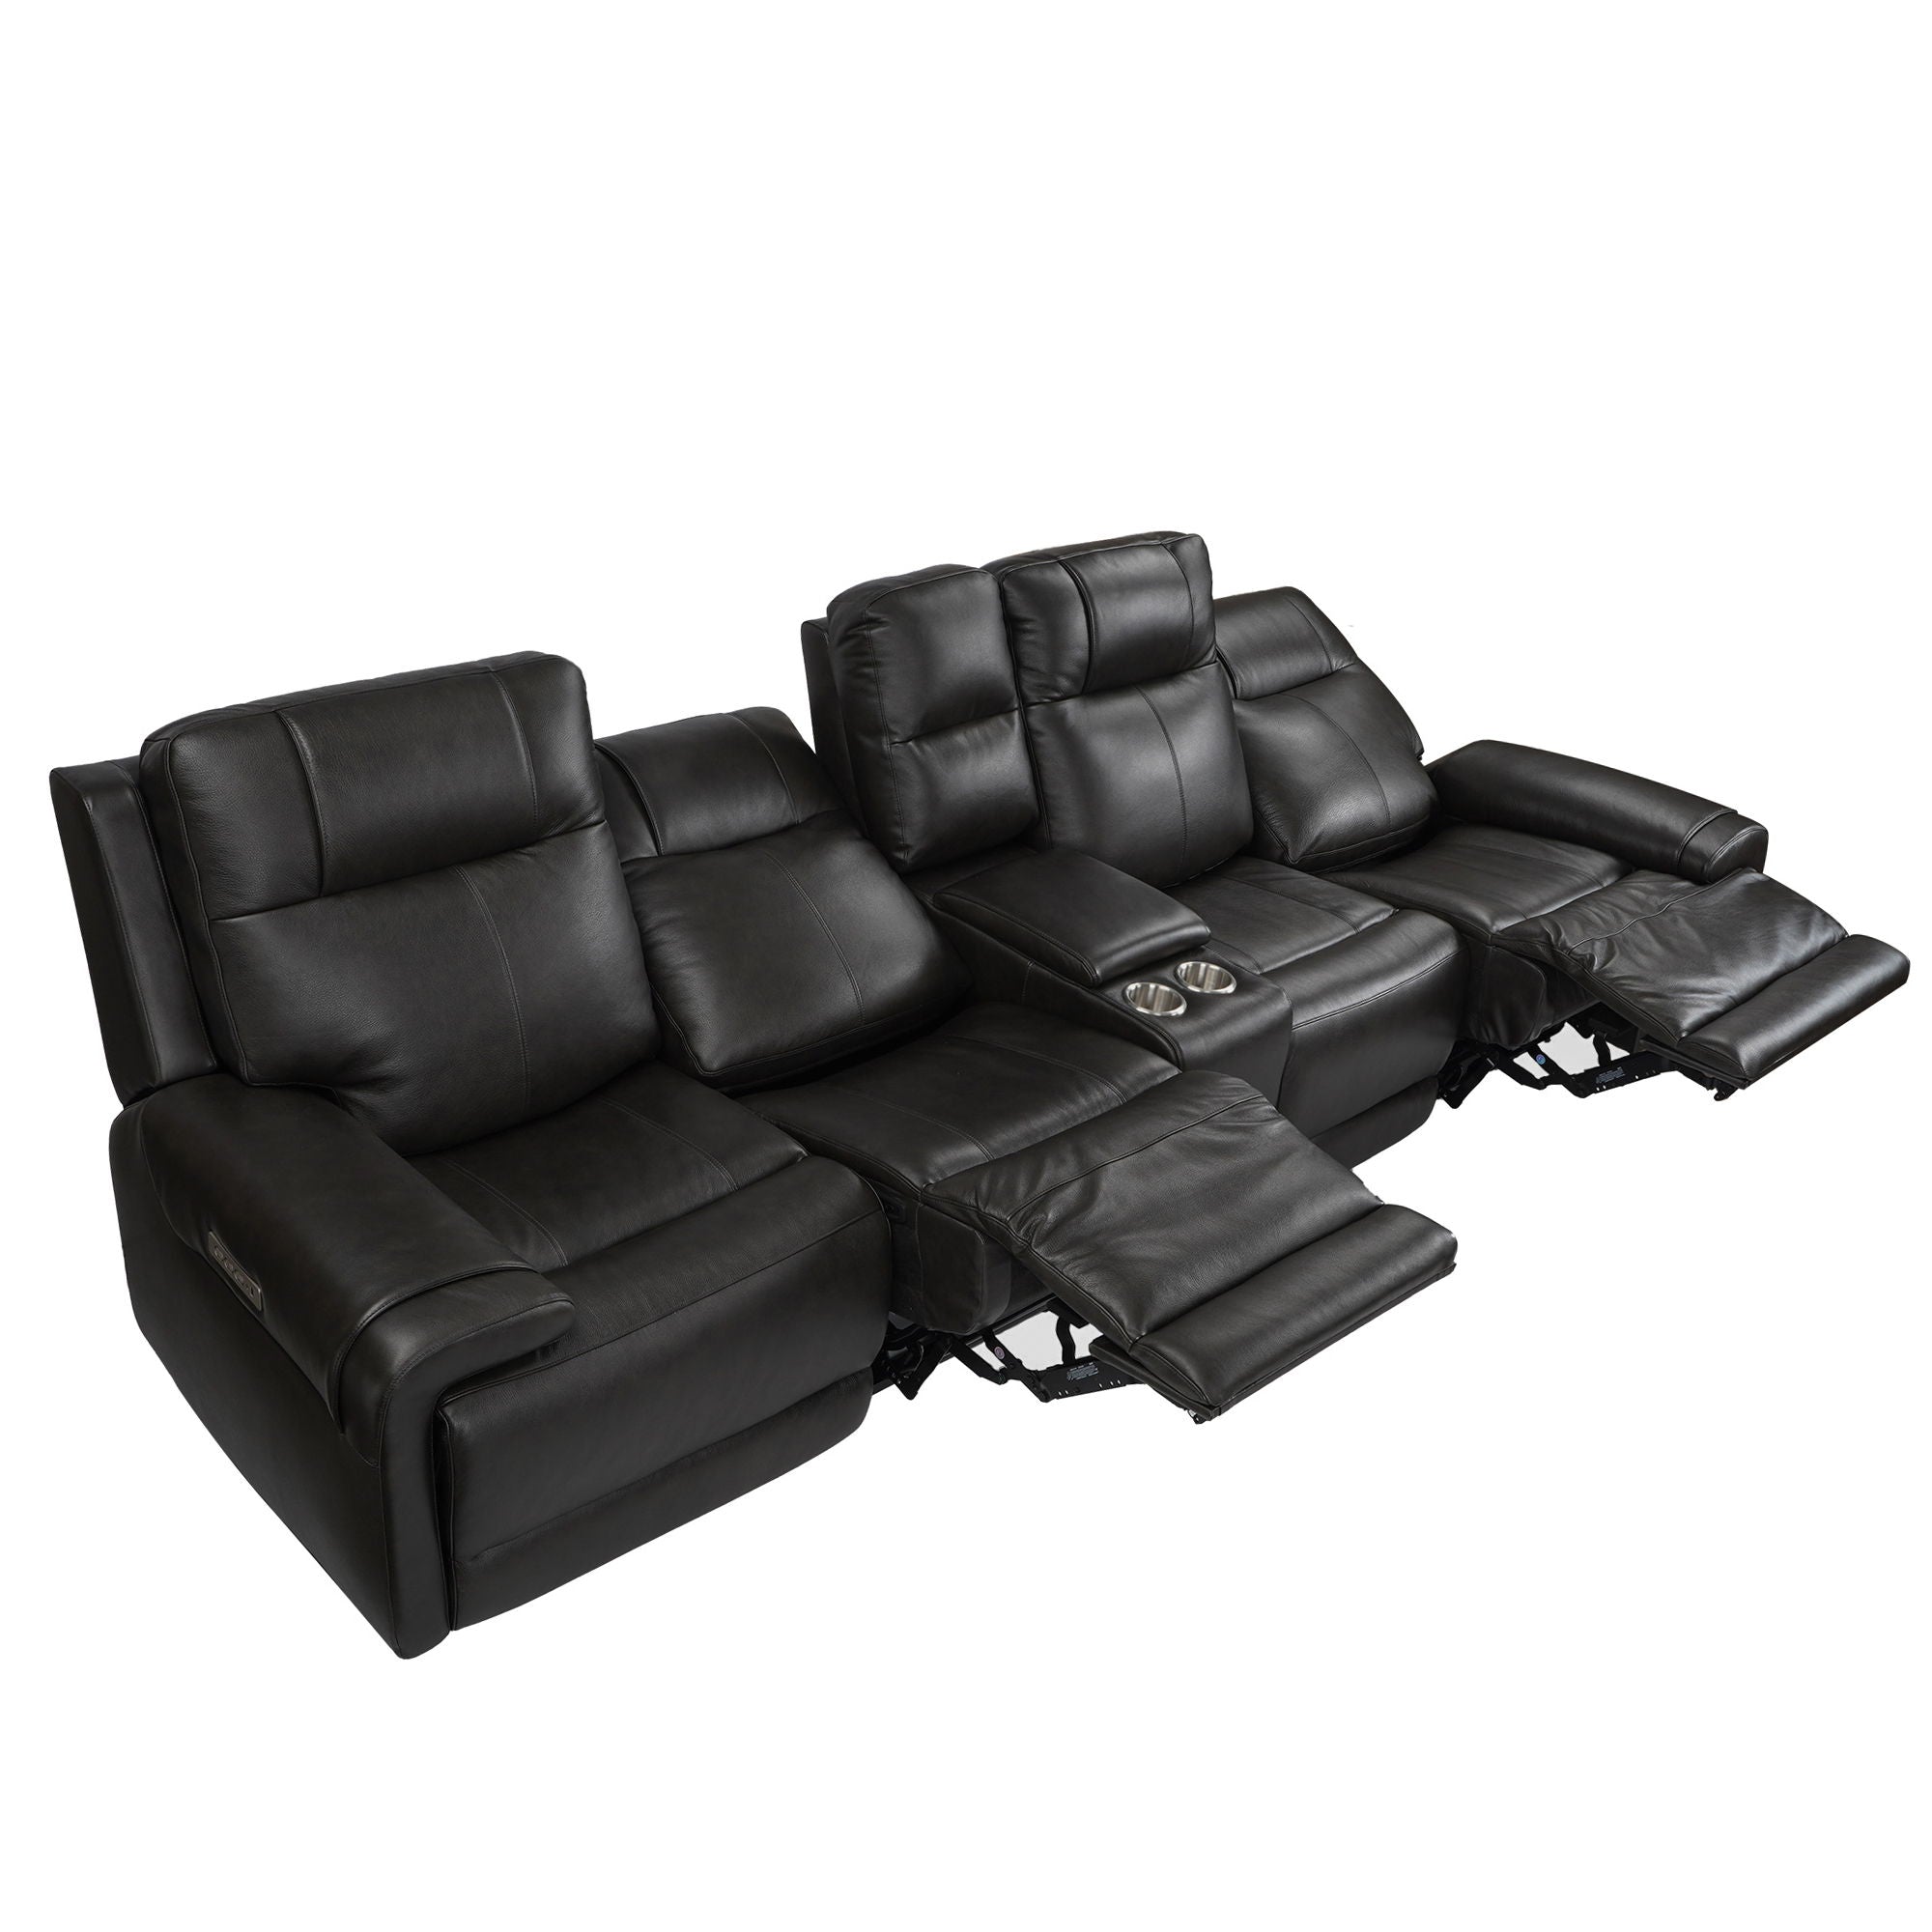 Trevor Triple 4 Seats Power Sofa With Console, Genuine Leather, Lumbar Support, Adjustable Headrest, USB & Type C Charge Port, Middle Armless Chair With Triple Power Control